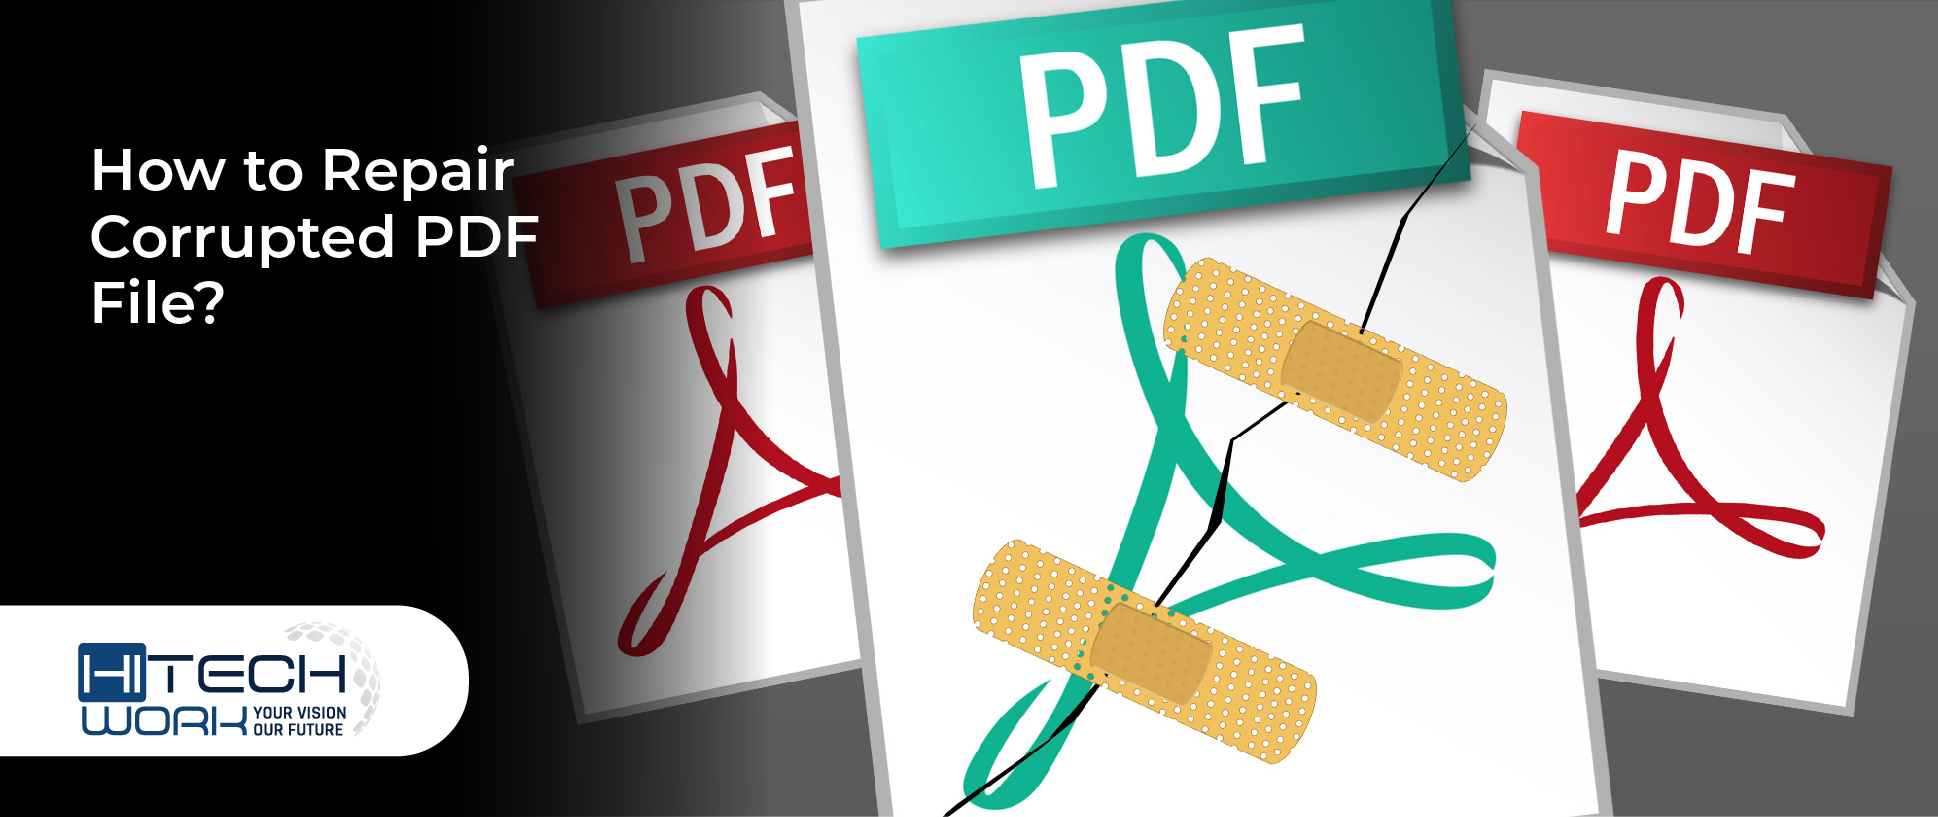 How to Repair Corrupted PDF File